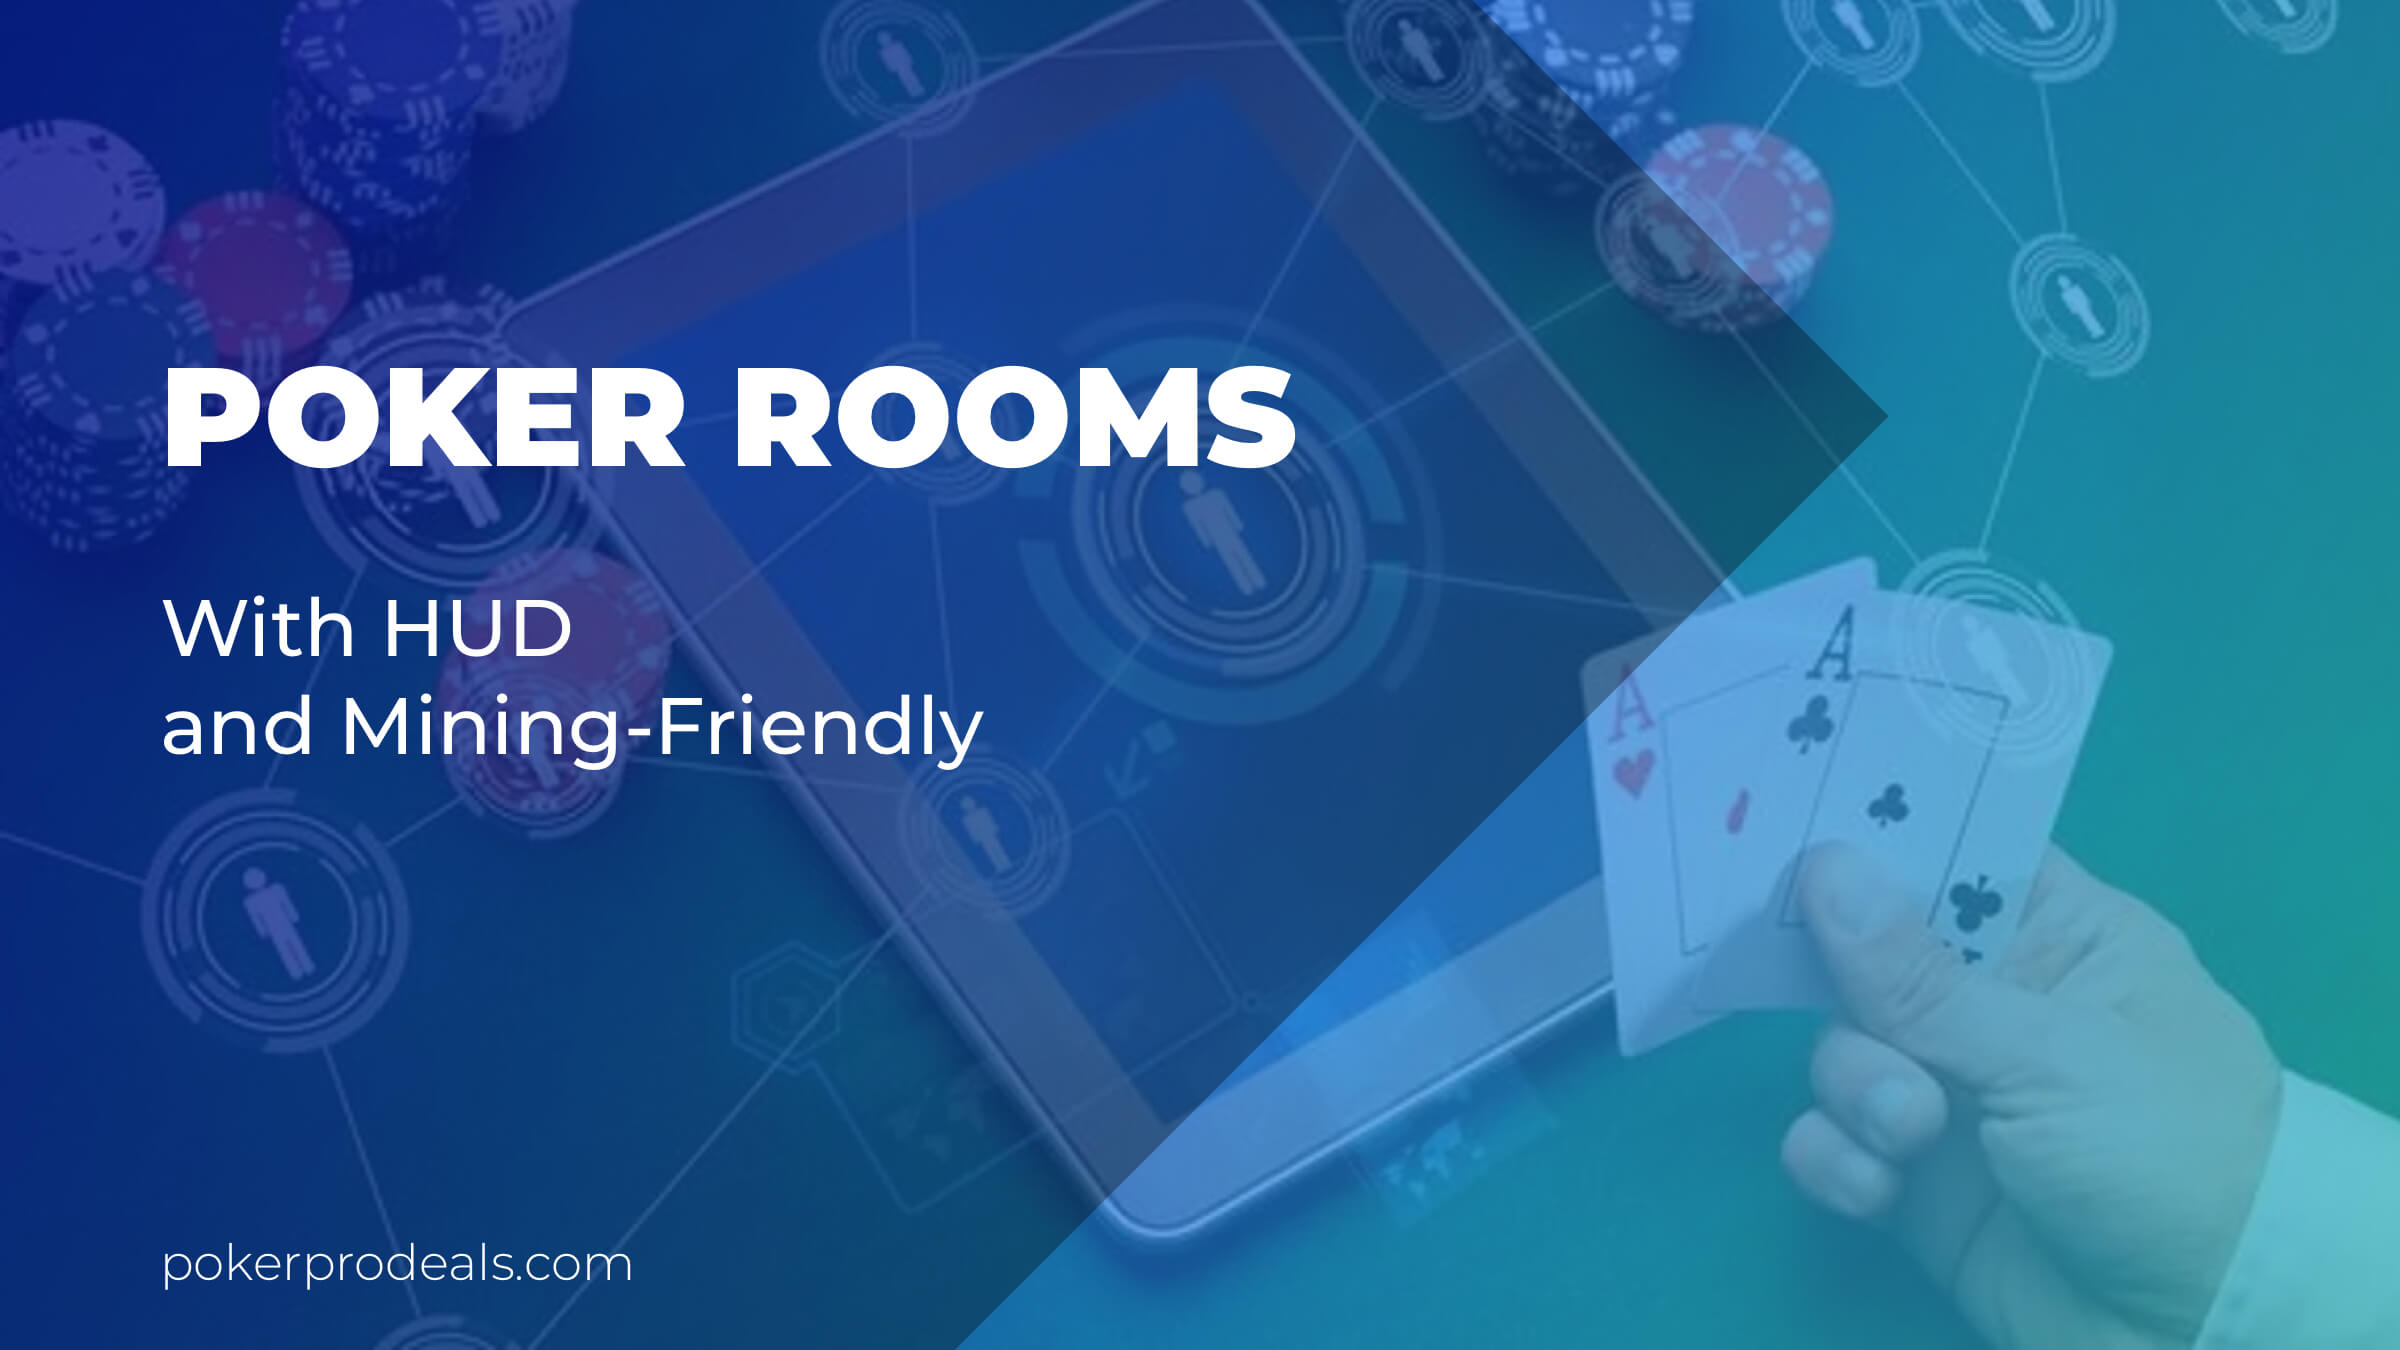 Poker Rooms with HUD and mining-friendy